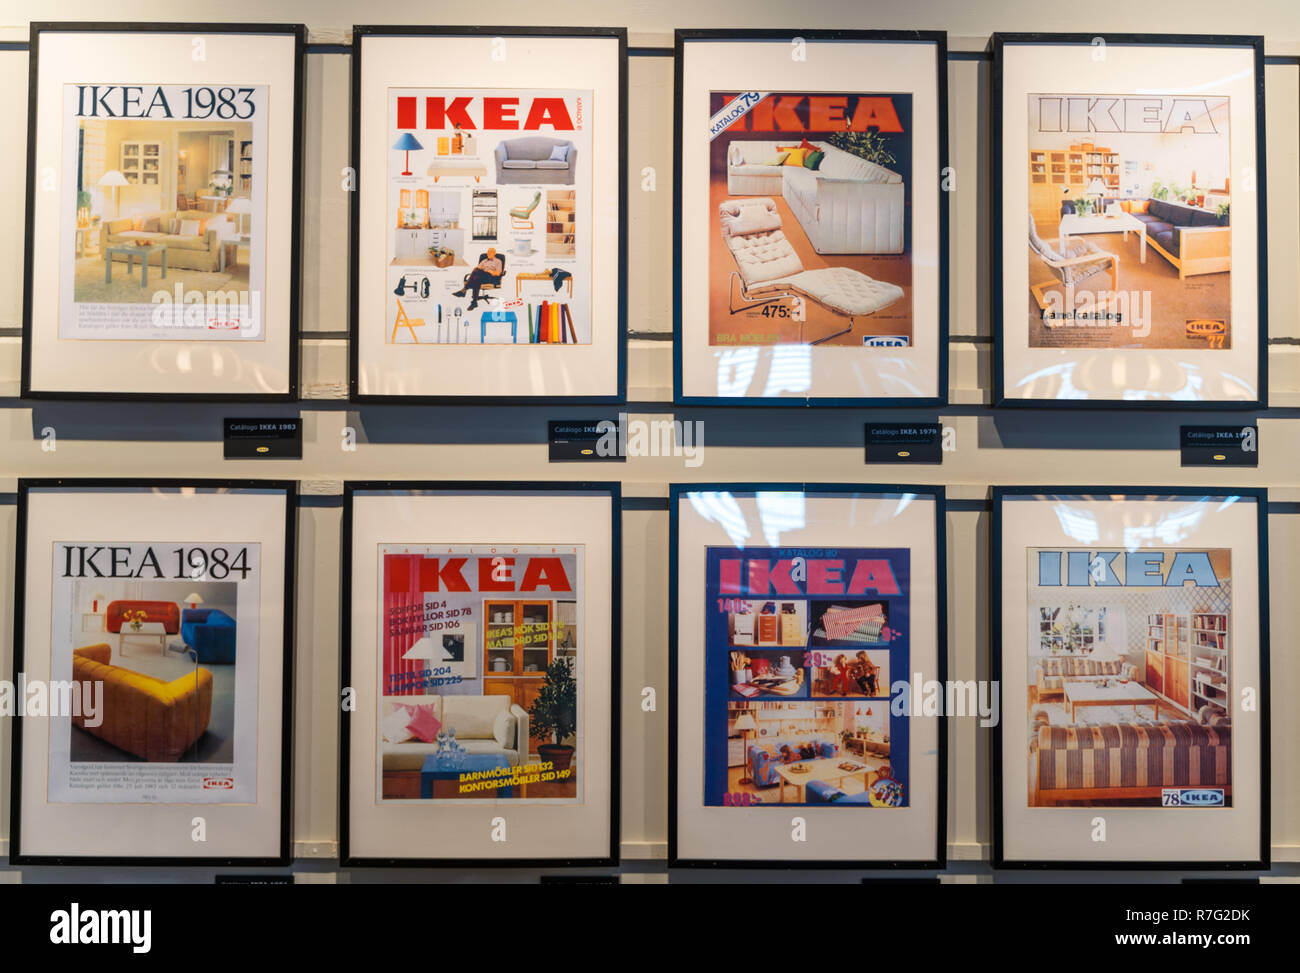 Valencia,Spain - December 09, 2018: Ikea store lot in Alfafar, Valencia. Exhibition of the old Ikea catalogs, framed on the wall. Vintage Ikea gallery Stock Photo